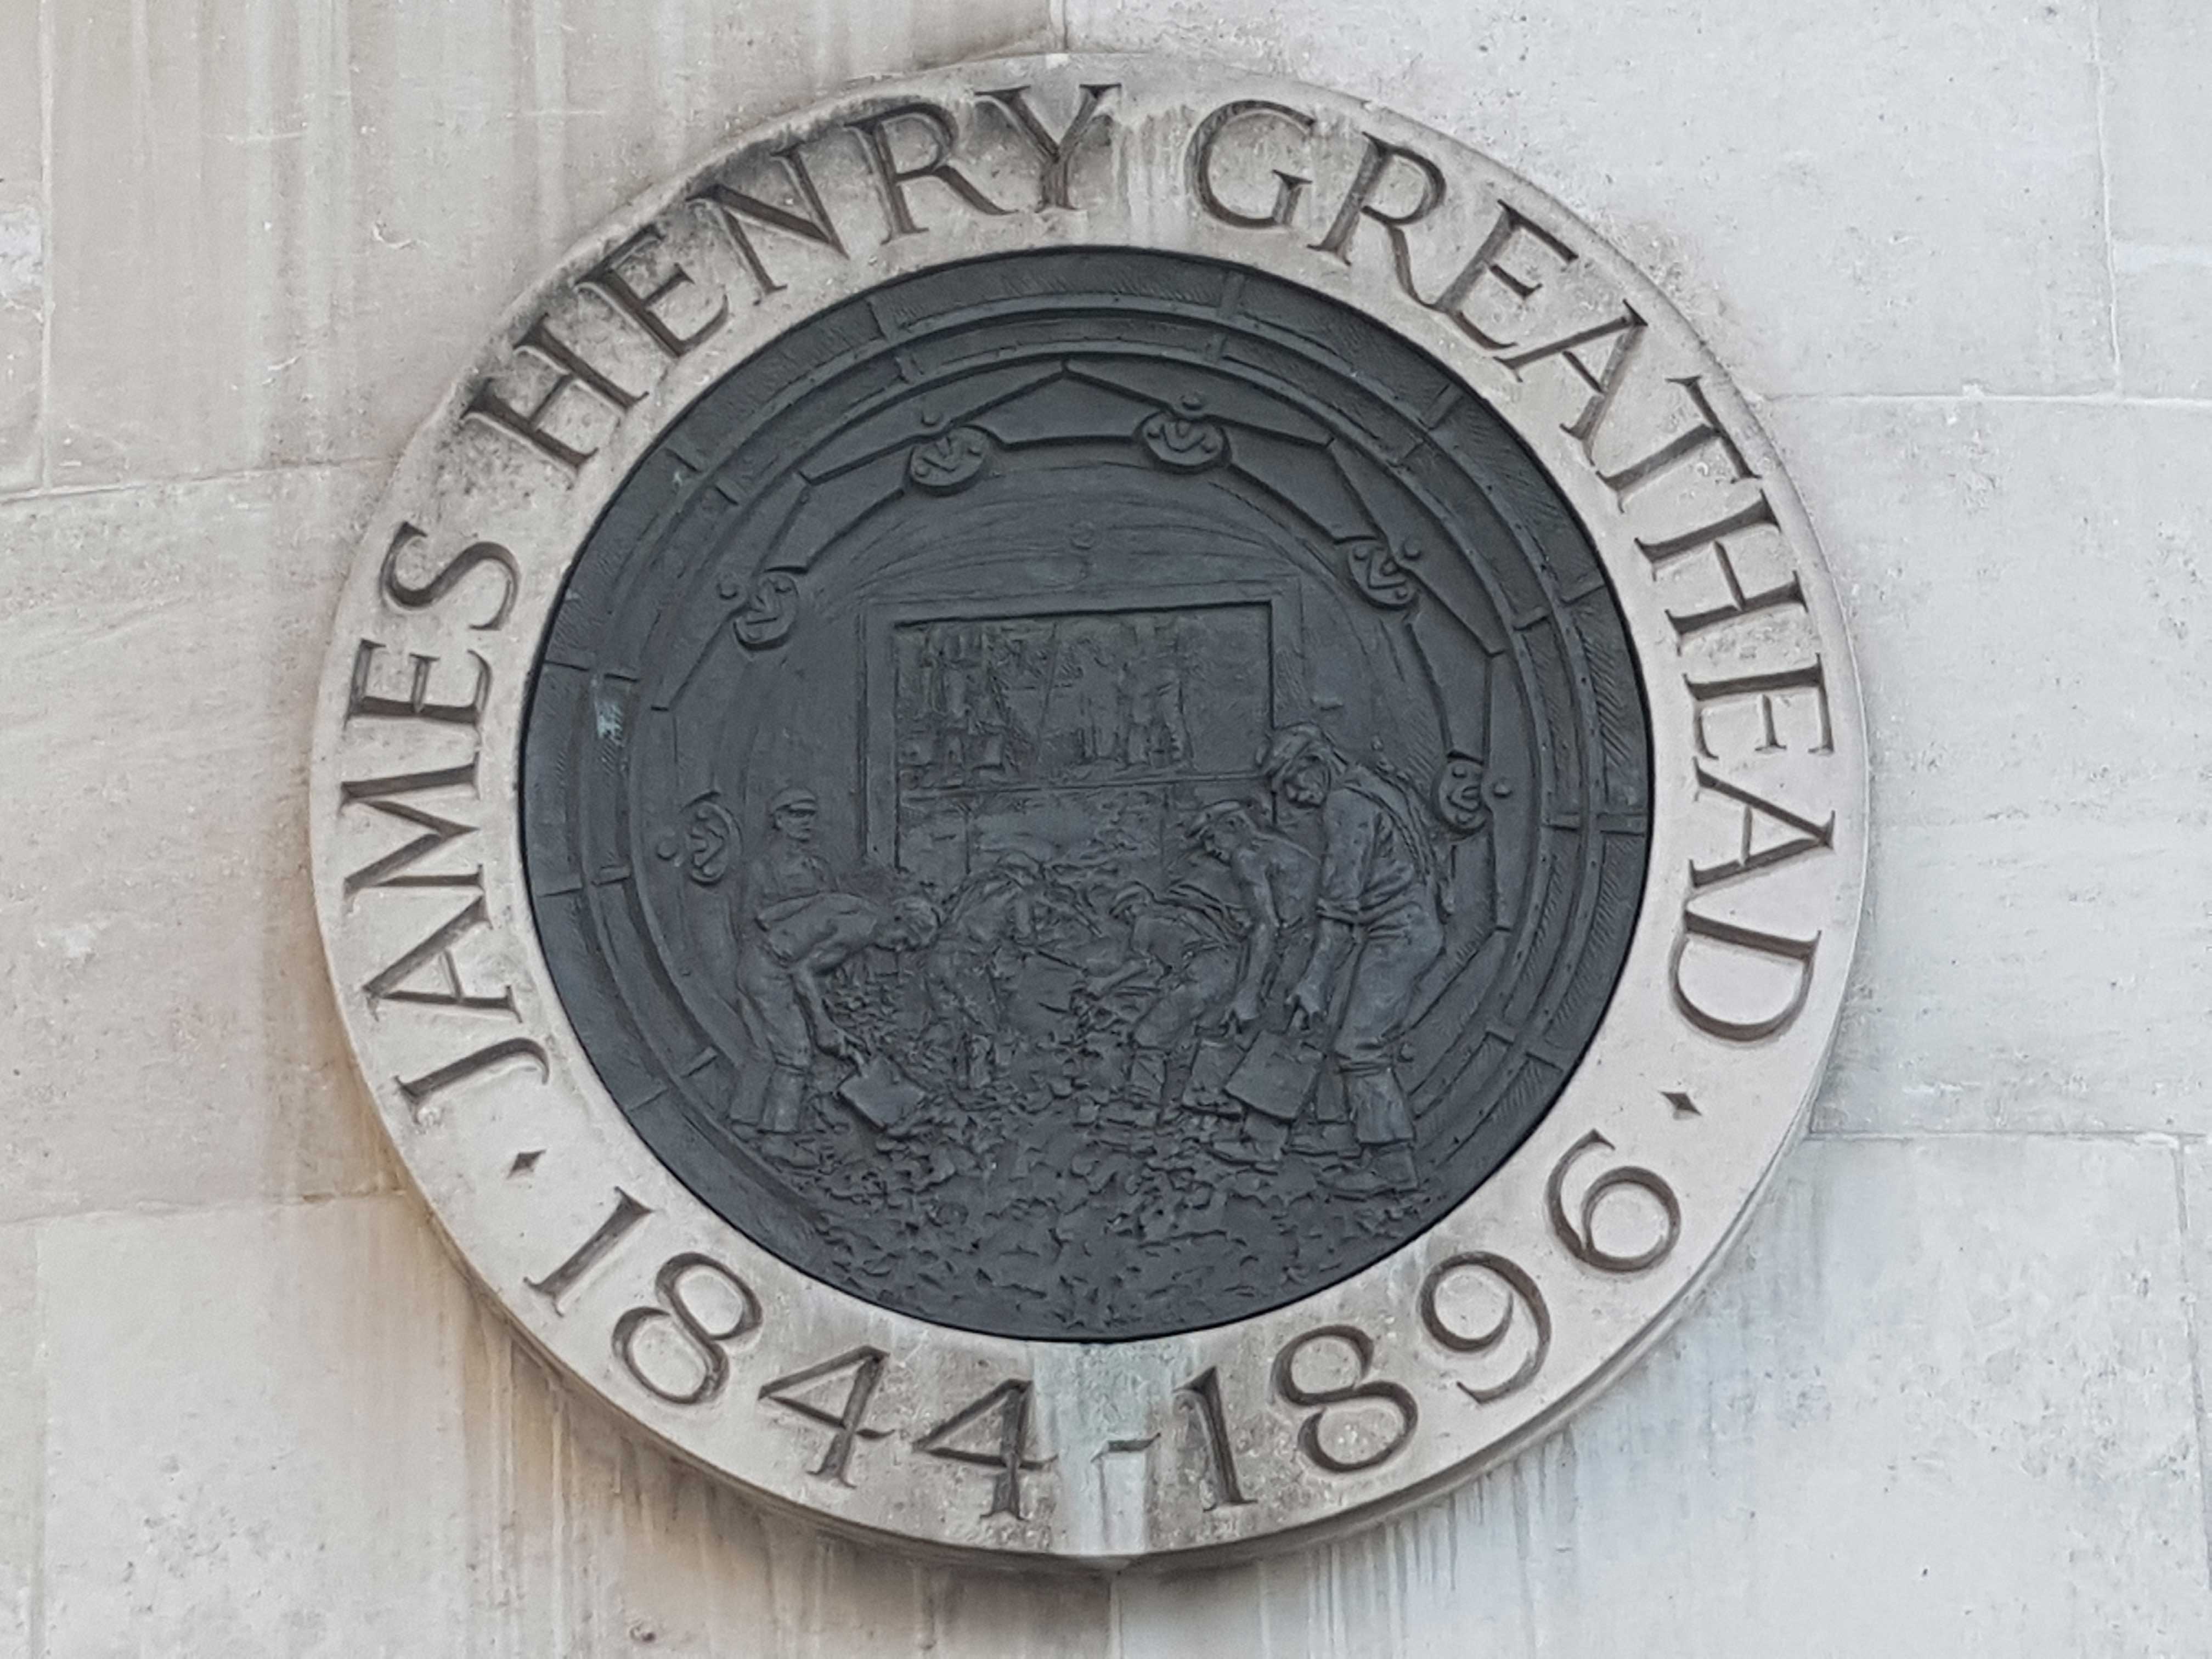 The plaque on the side of the Greathead statue.